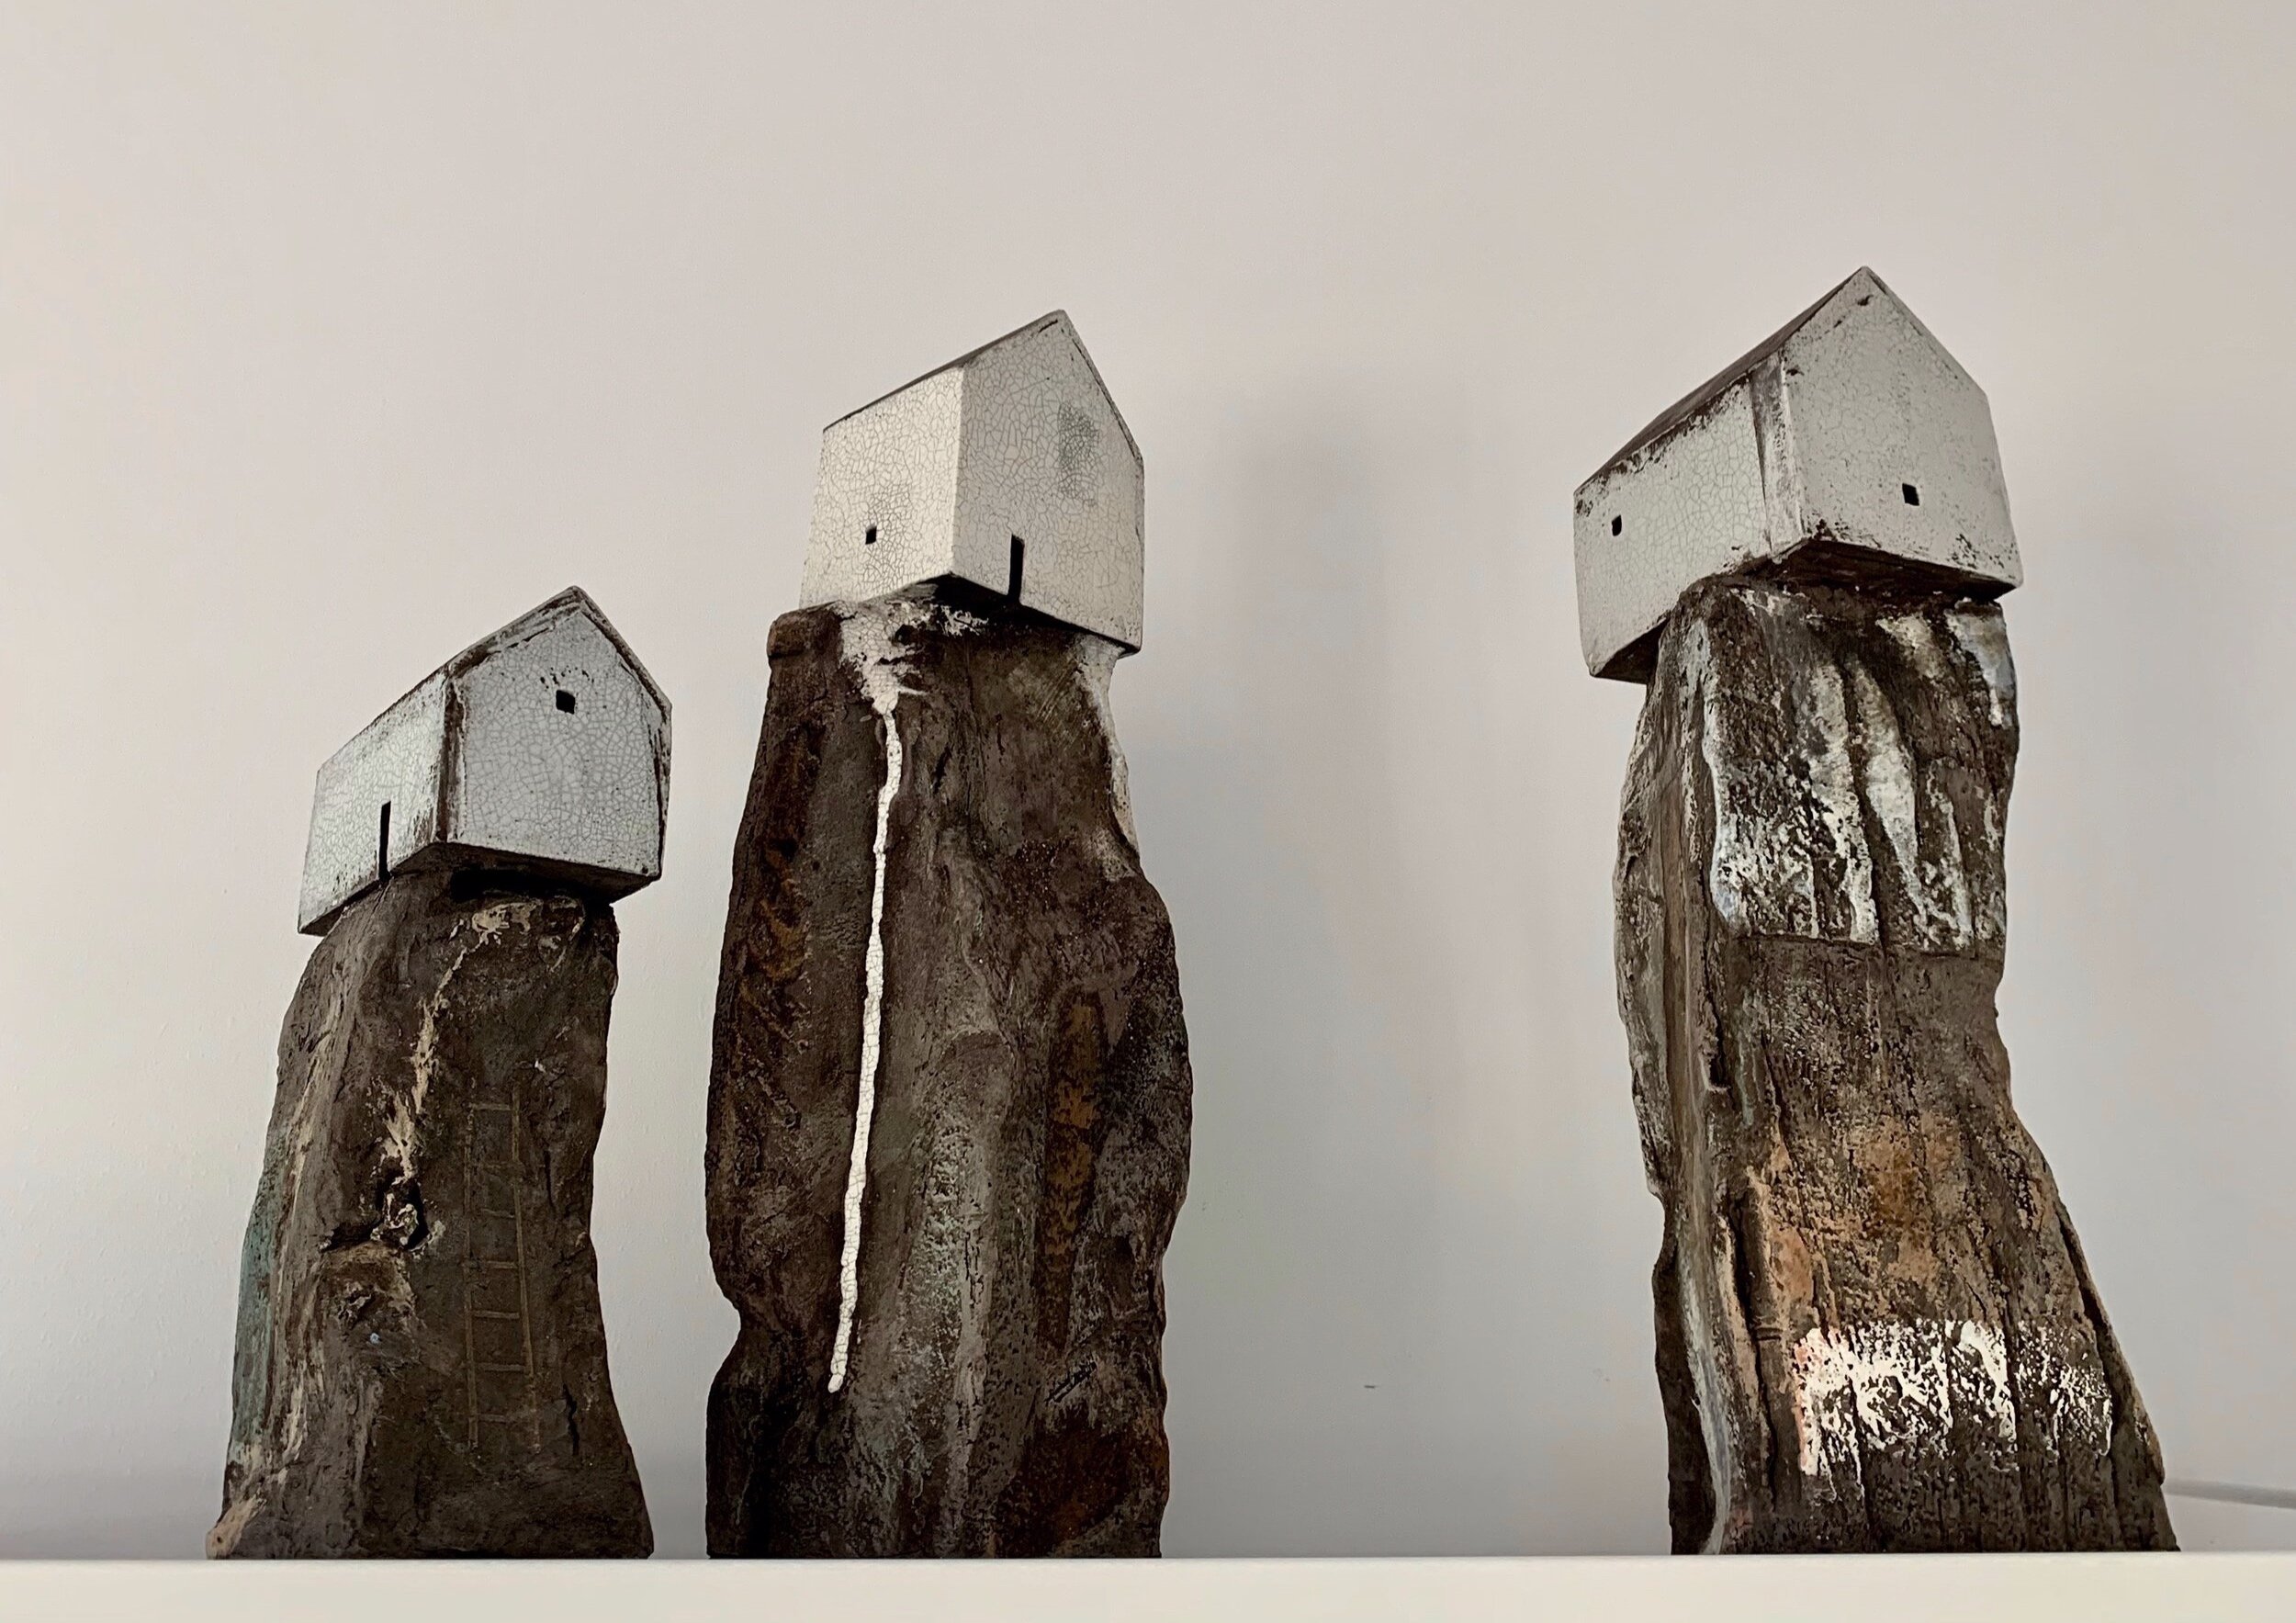 Three house on rock sculptures